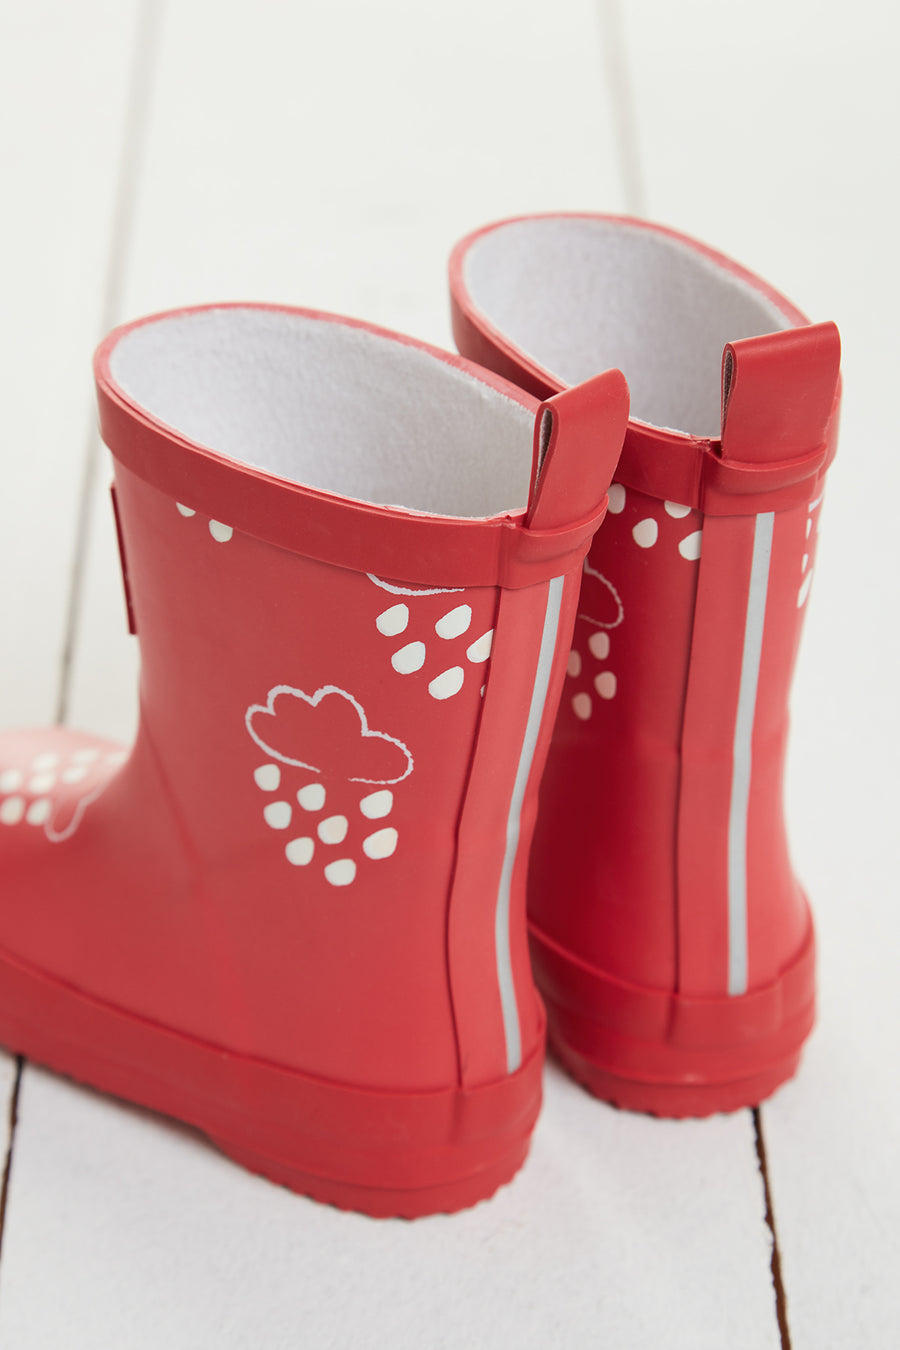 Grass and Air wellies|Infant |Colour Changing|Dark Coral